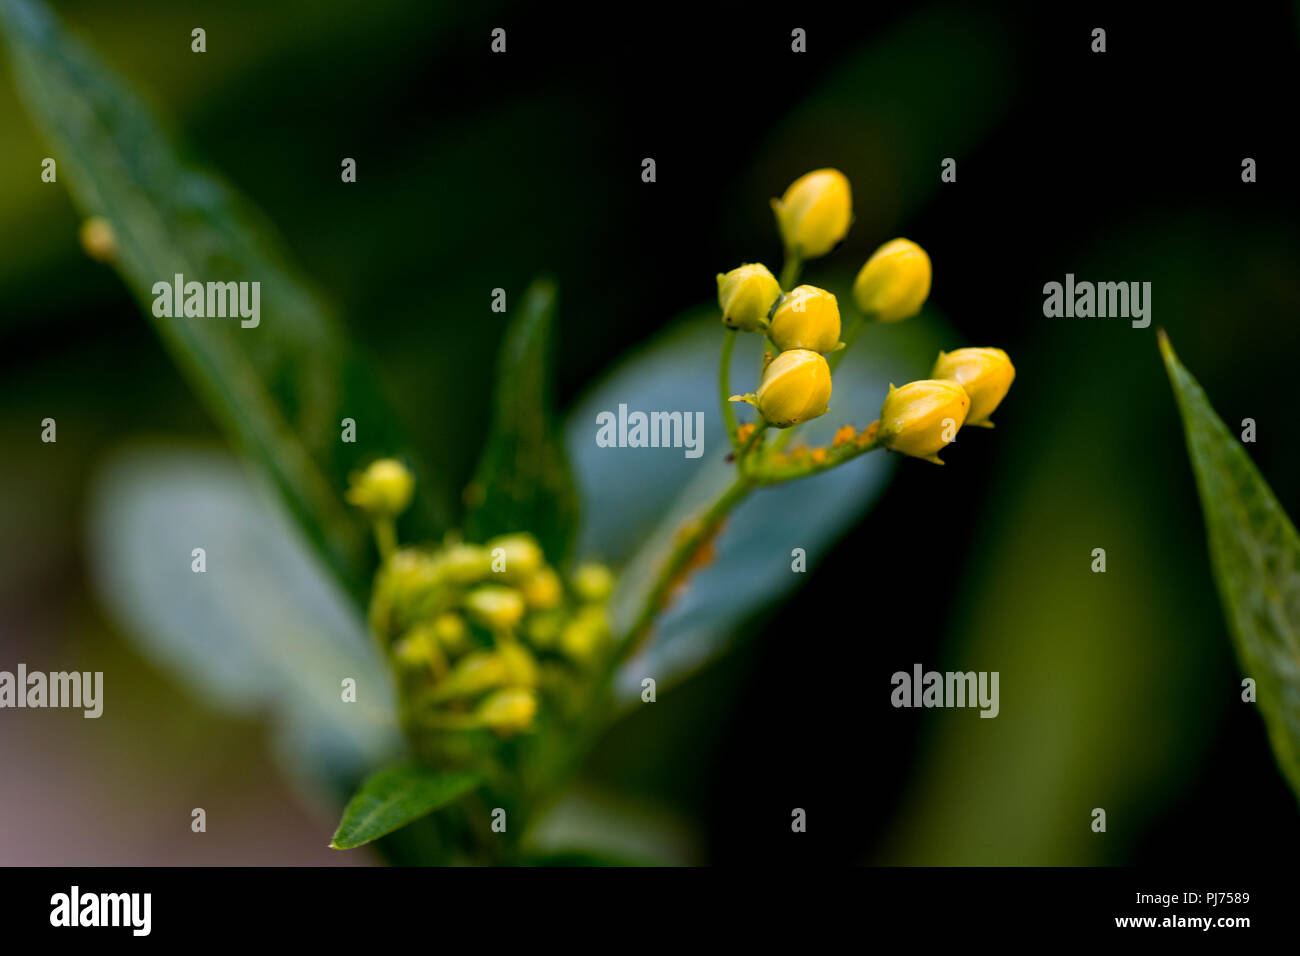 un bloomed flower buds Stock Photo